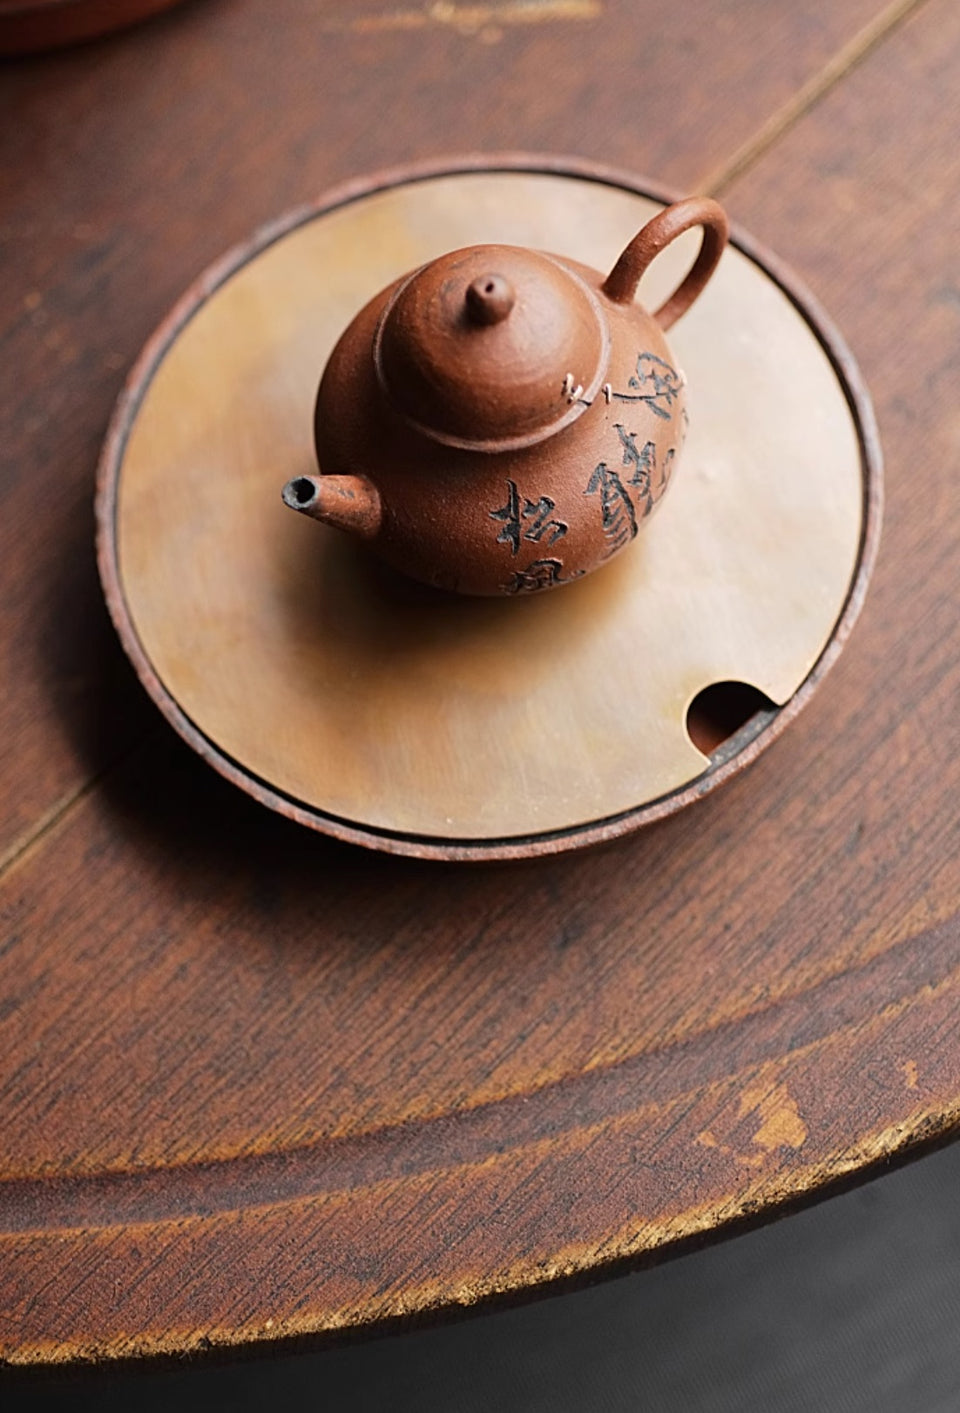 Limited Edition Huishan Red, Copper, & Calligraphy Teapot #4 by Cheng Wei